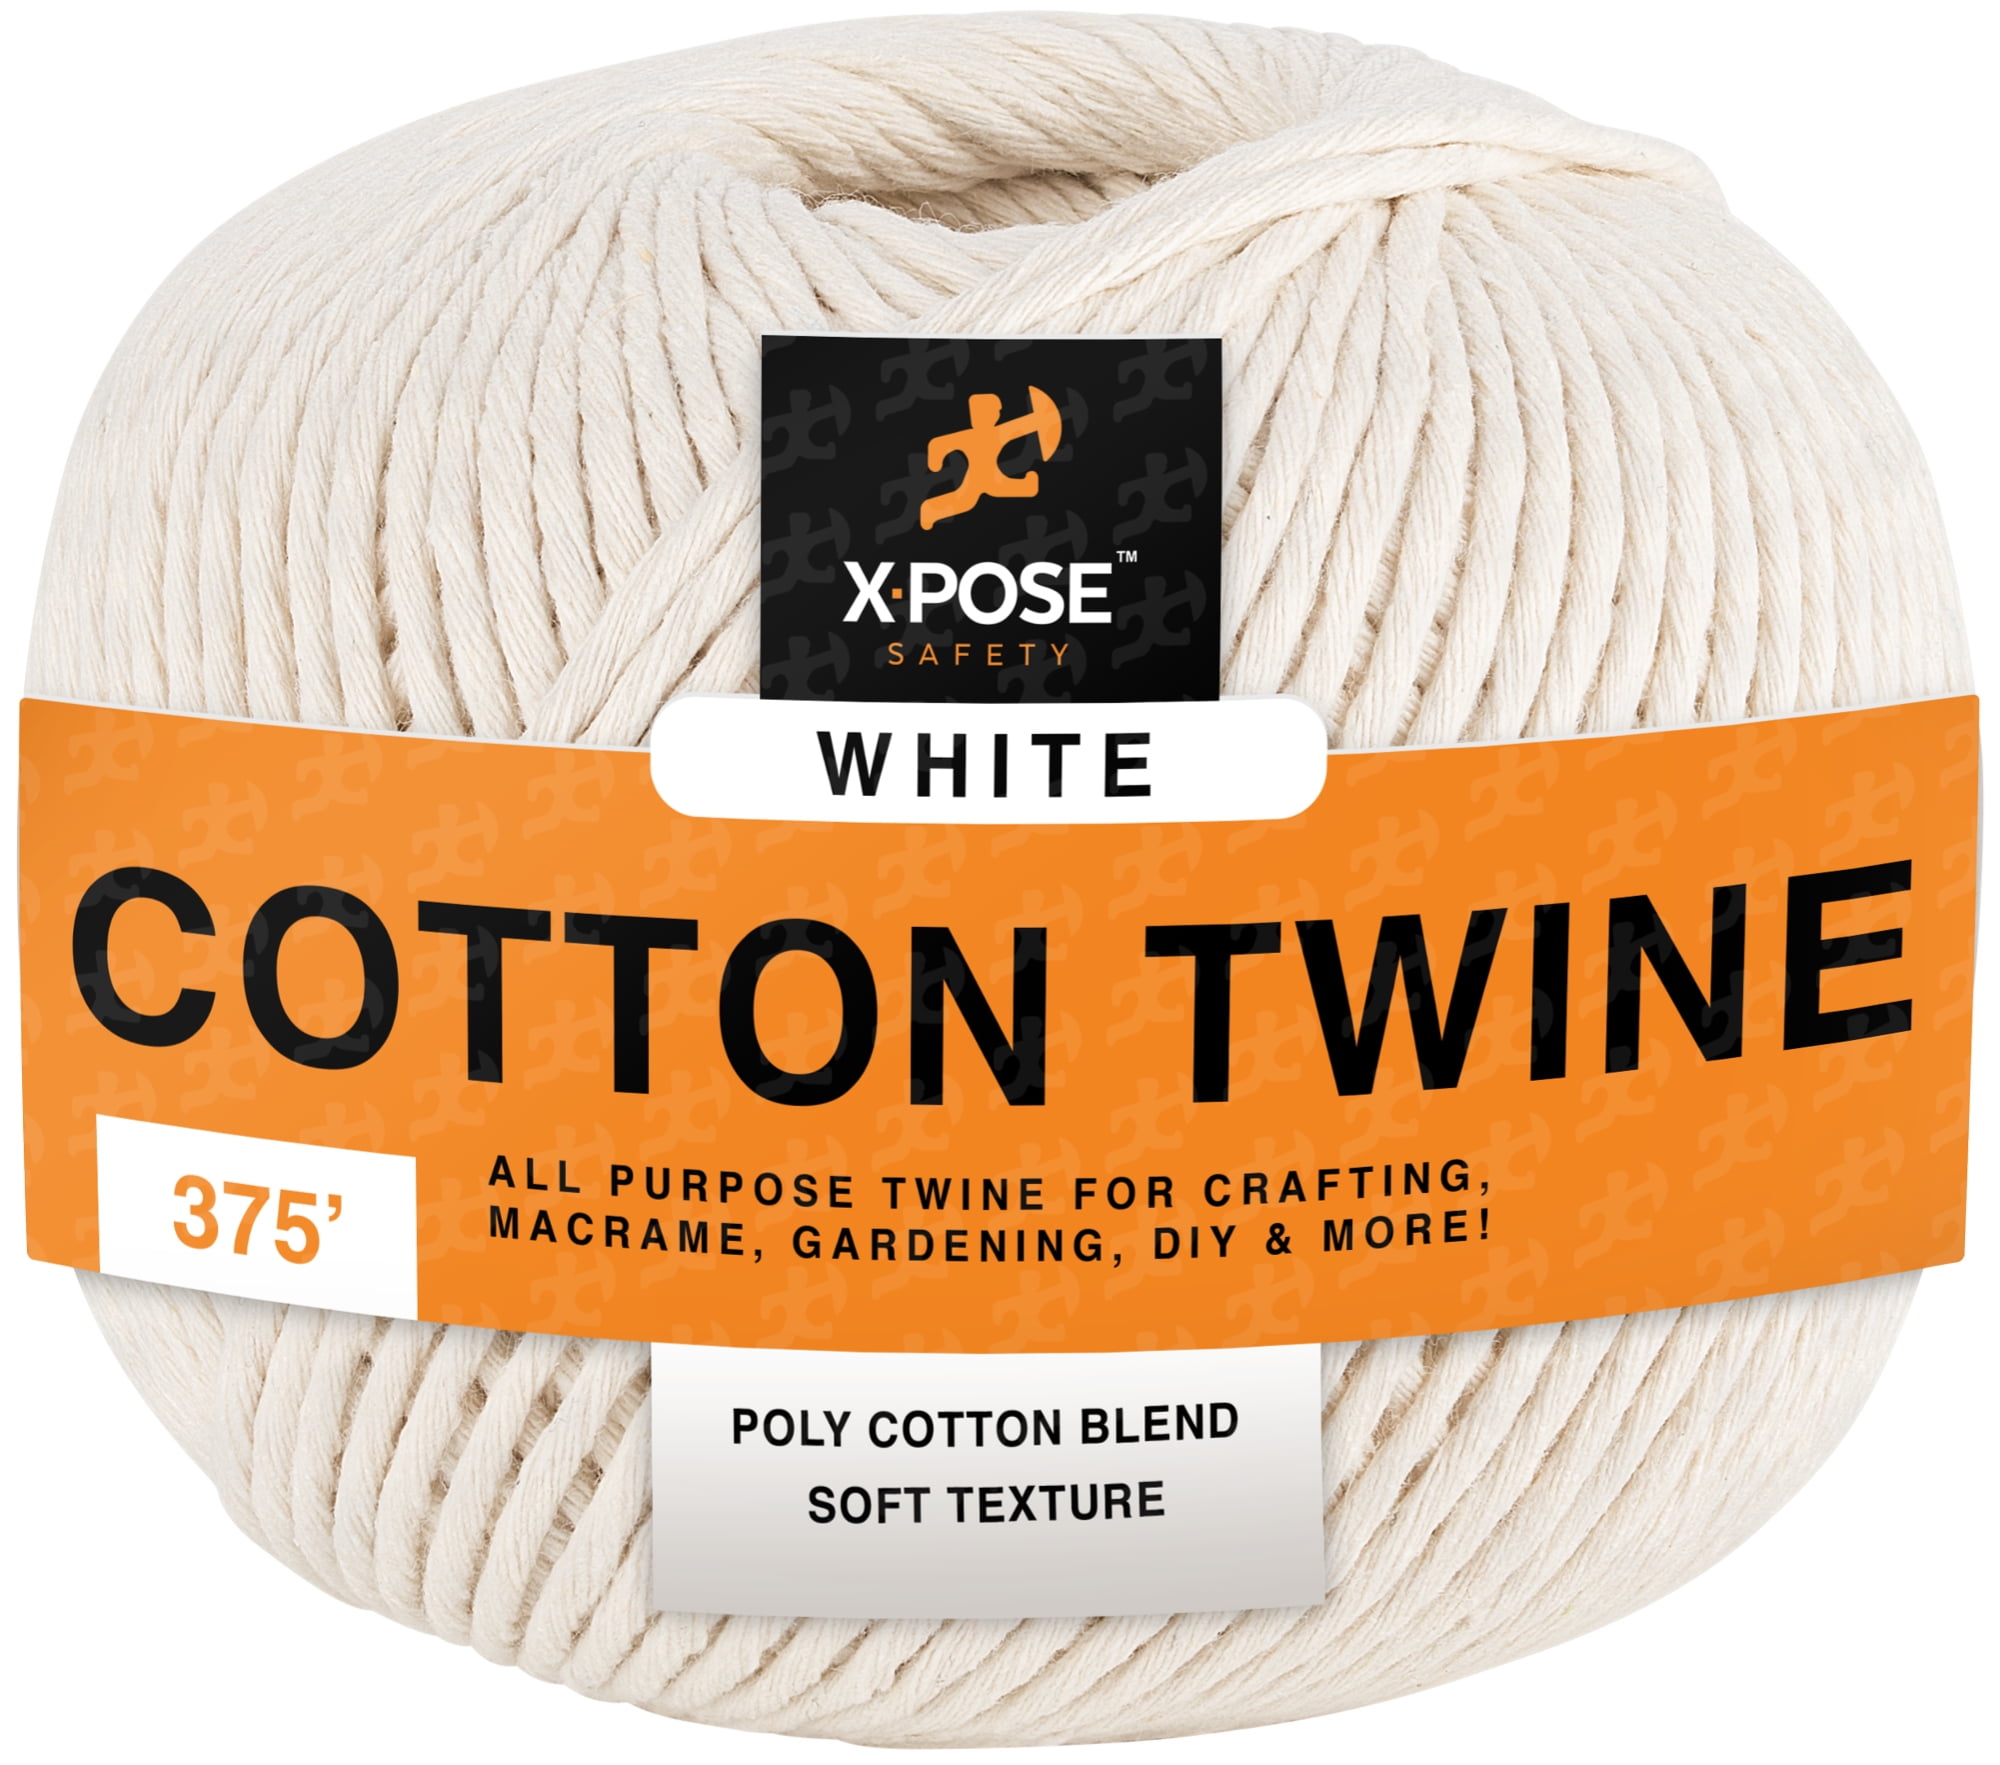 Butchers Twine String,500 Feet Natural Cotton Twine String Cooking